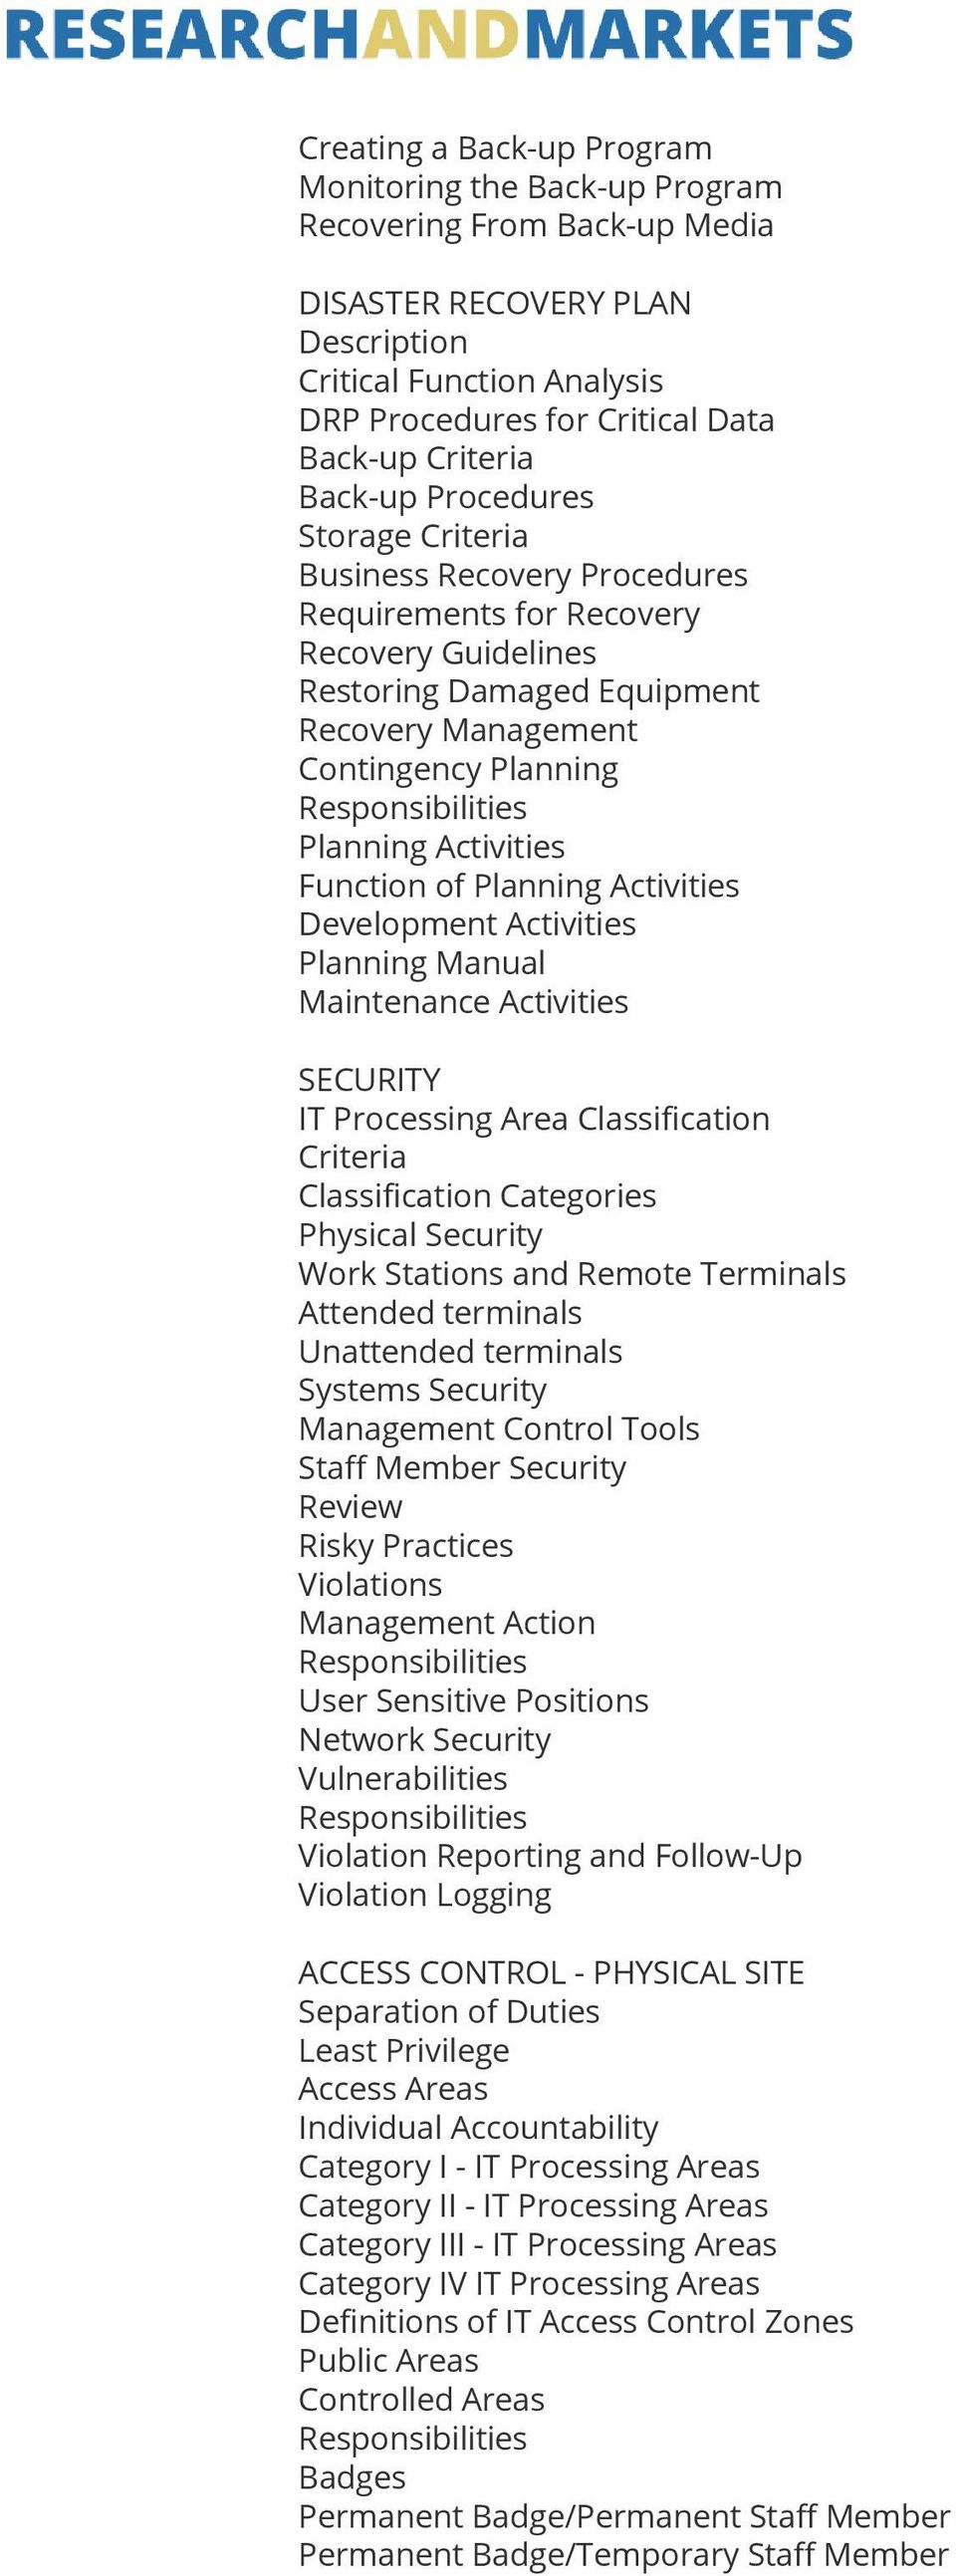 Function of Planning Activities Development Activities Planning Manual Maintenance Activities SECURITY IT Processing Area Classification Criteria Classification Categories Physical Security Work